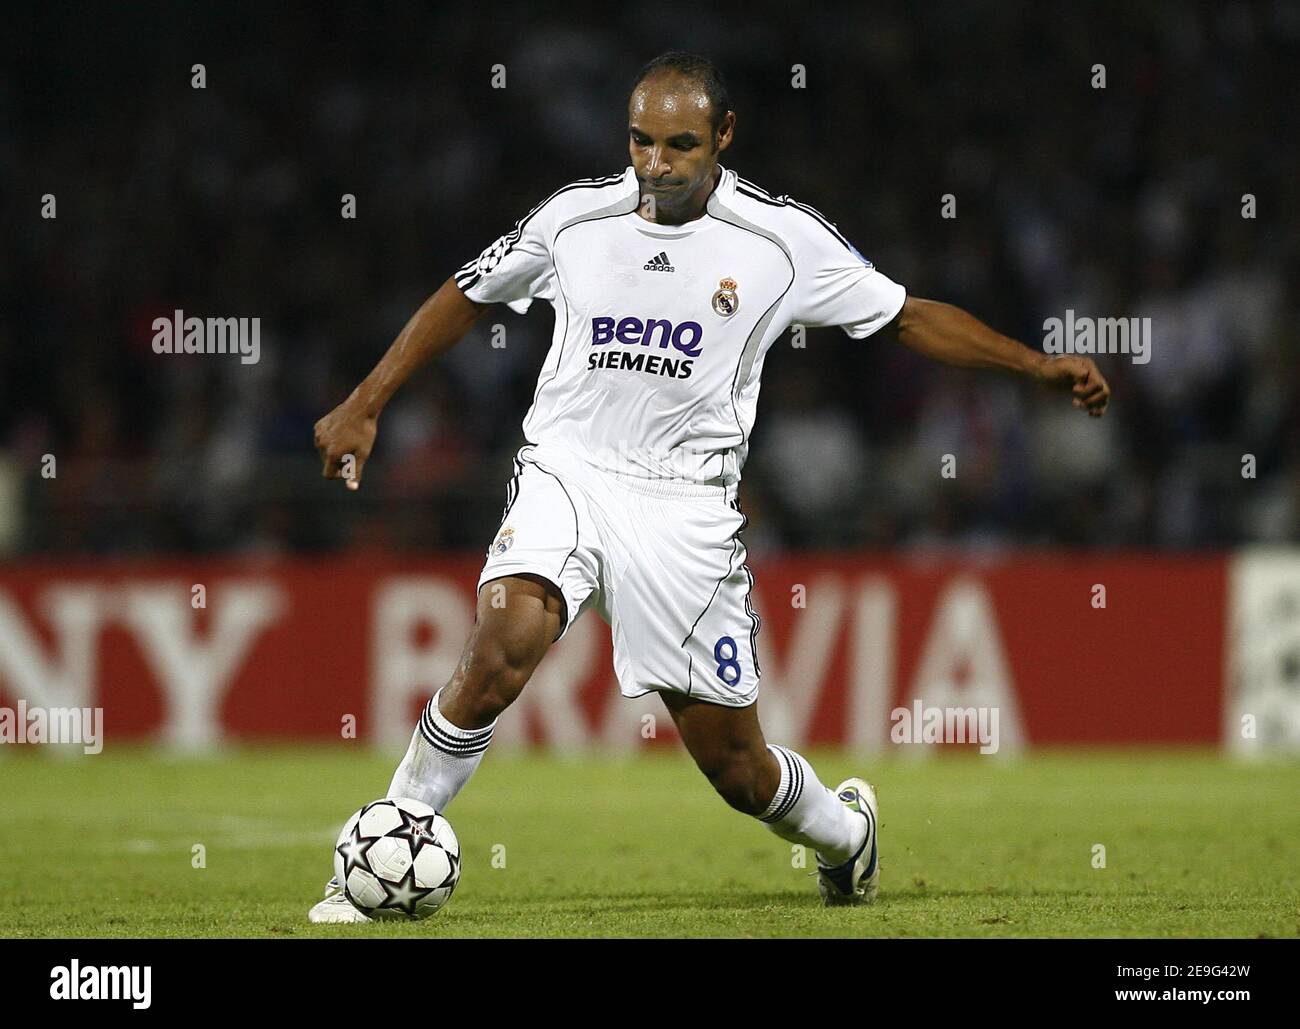 Real Madrid's Emerson during the UEFA Champions League, Group E, Olympique  Lyonnais vs Real Madrid CF at the Gerland Stadium in Lyon, France on  September 13, 2006. Lyon won 2-0. Photo by